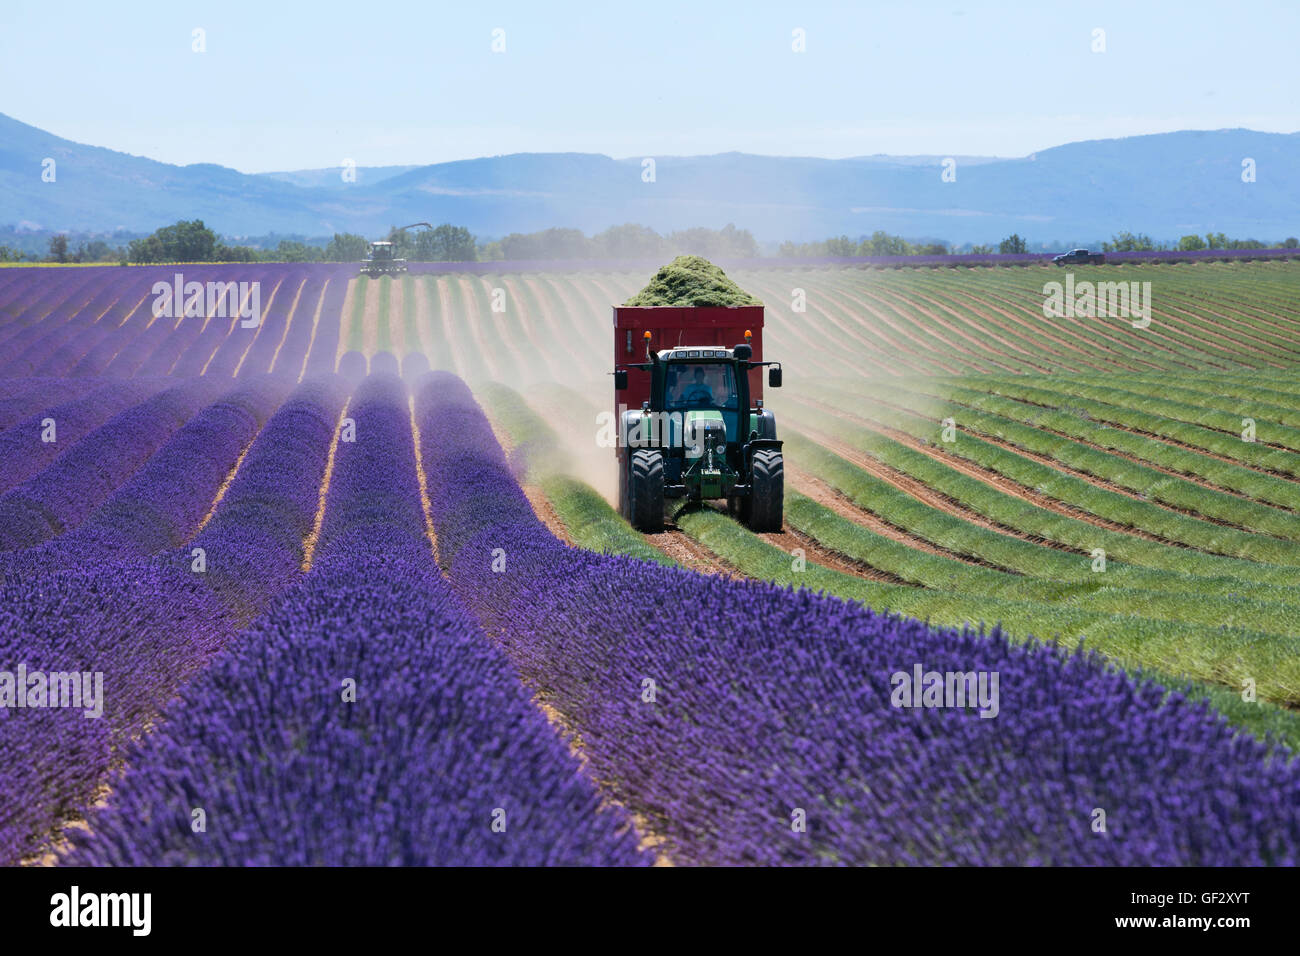 Lavender field in France during harvest time, Provence. Tractor and harvester in action Stock Photo